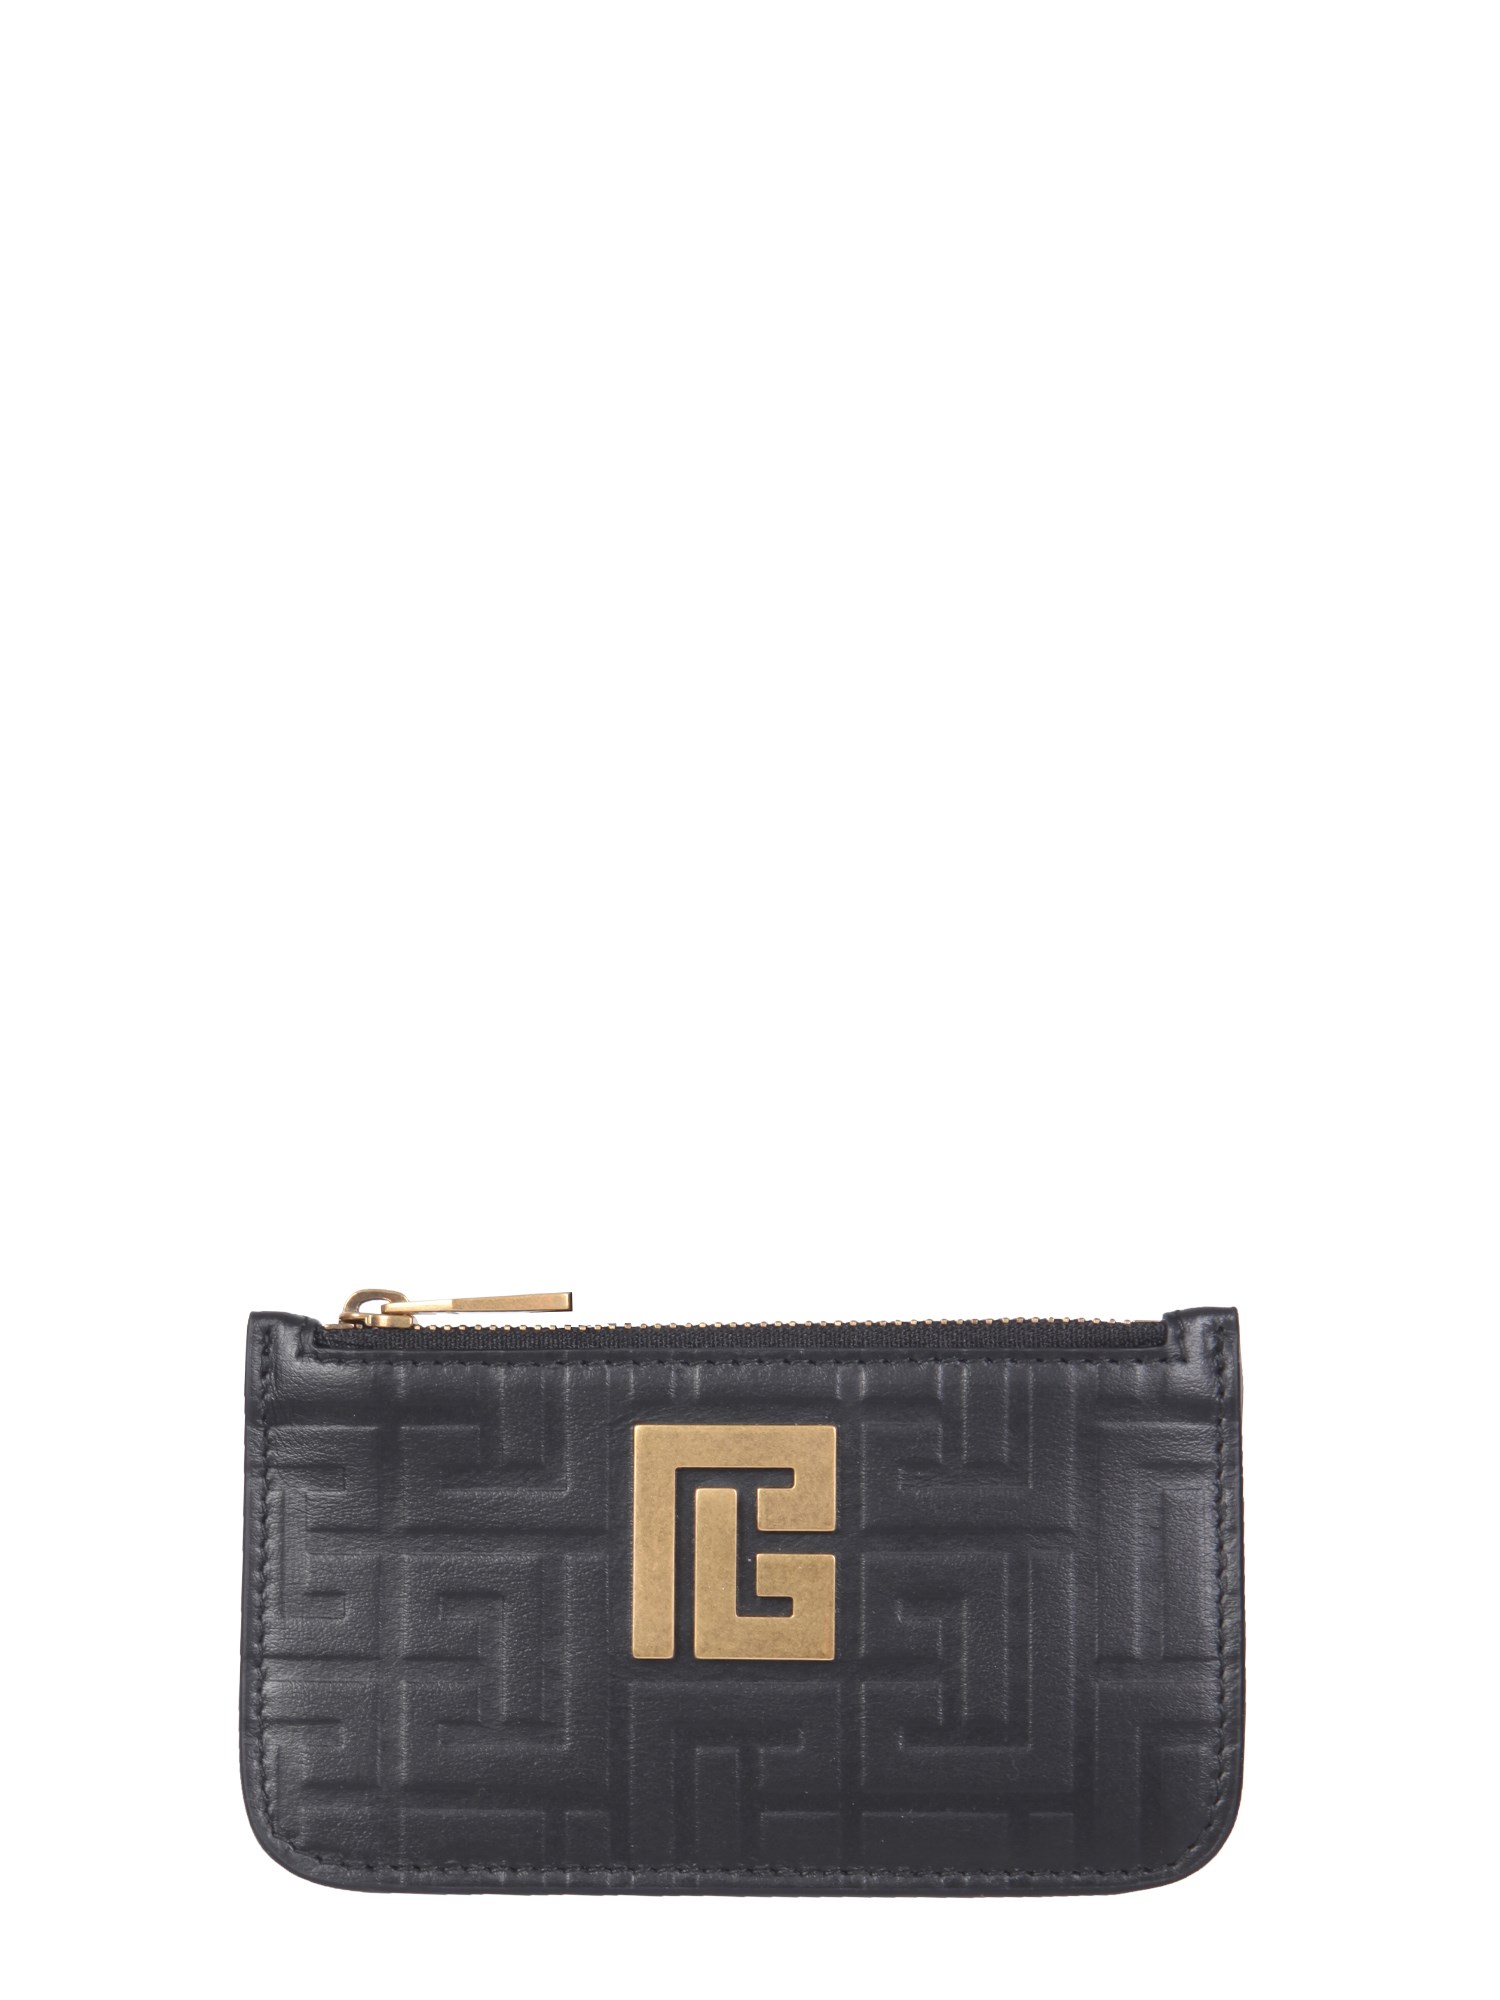 balmain leather card holder with zip